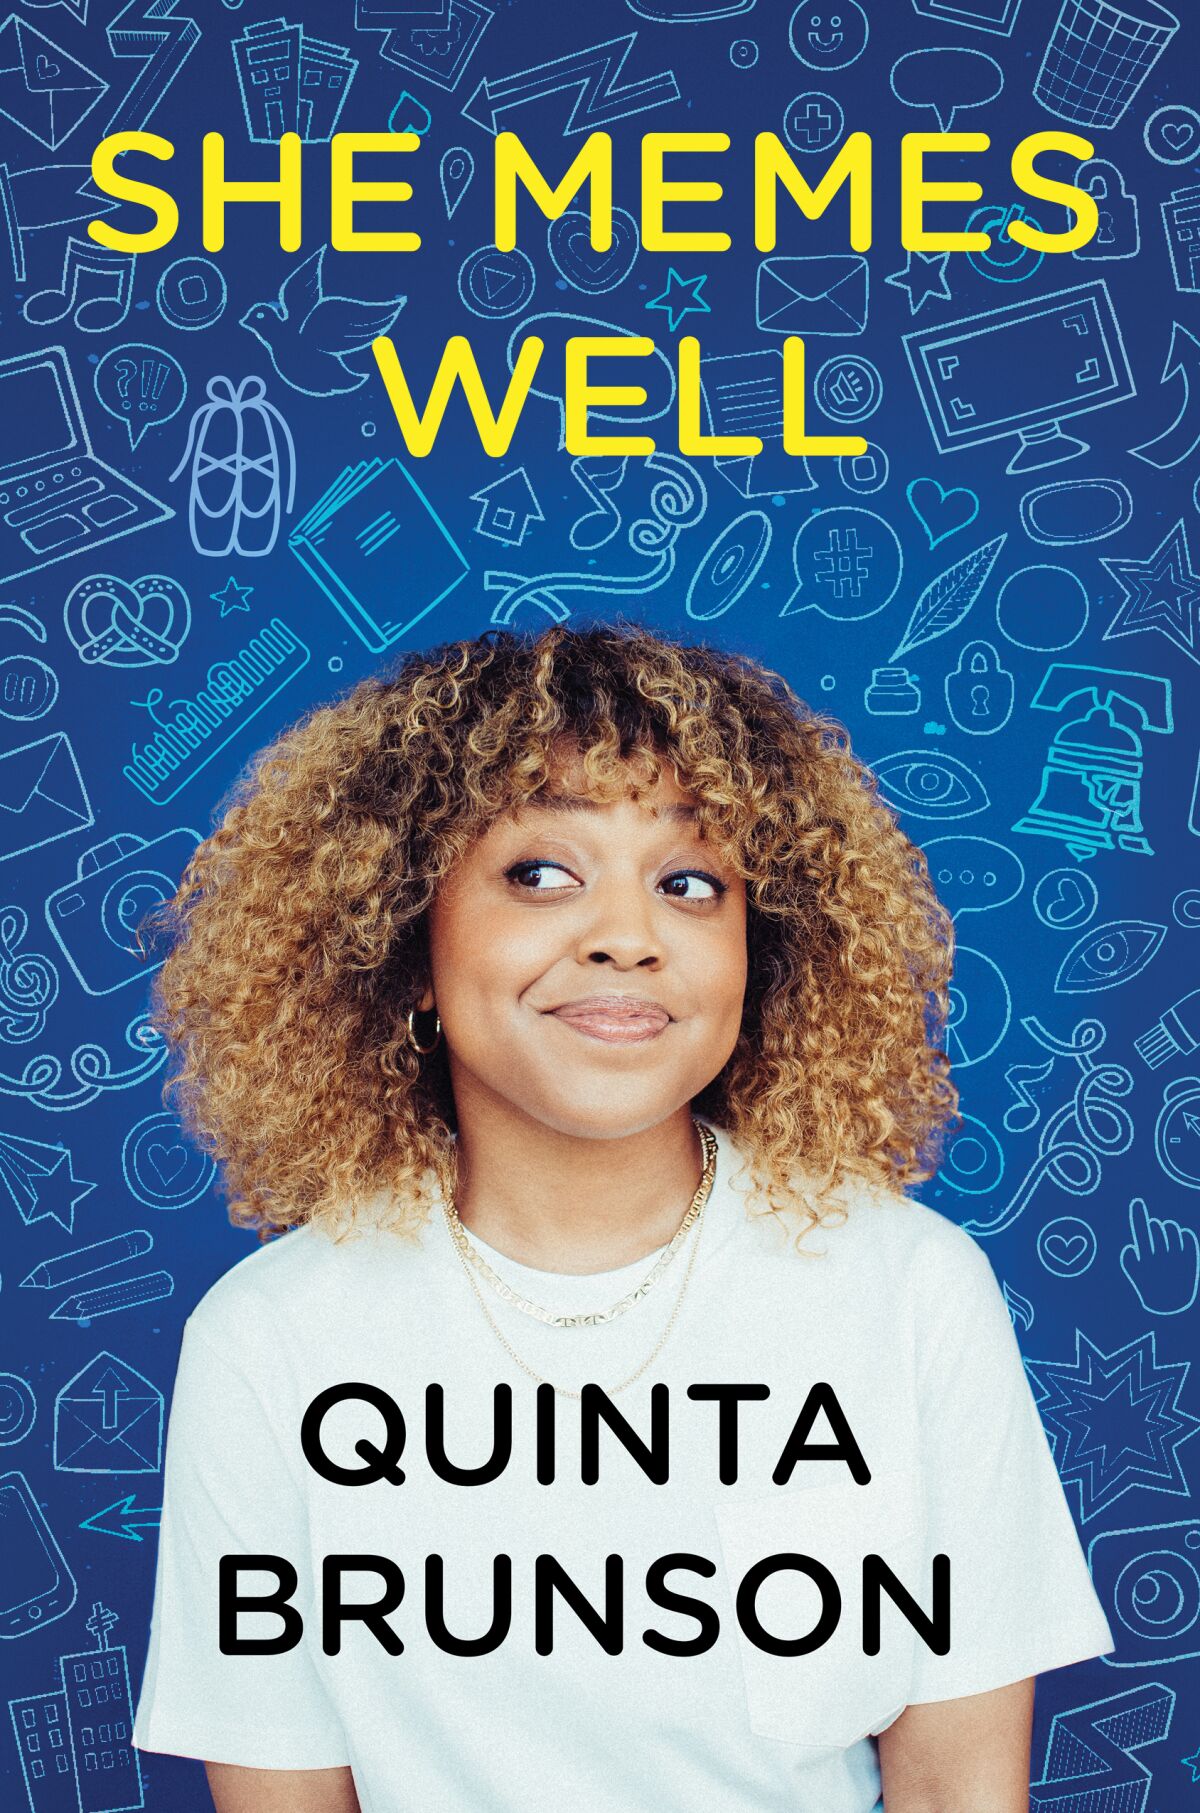 The cover of the book "She Memes Well" by Quinta Brunson